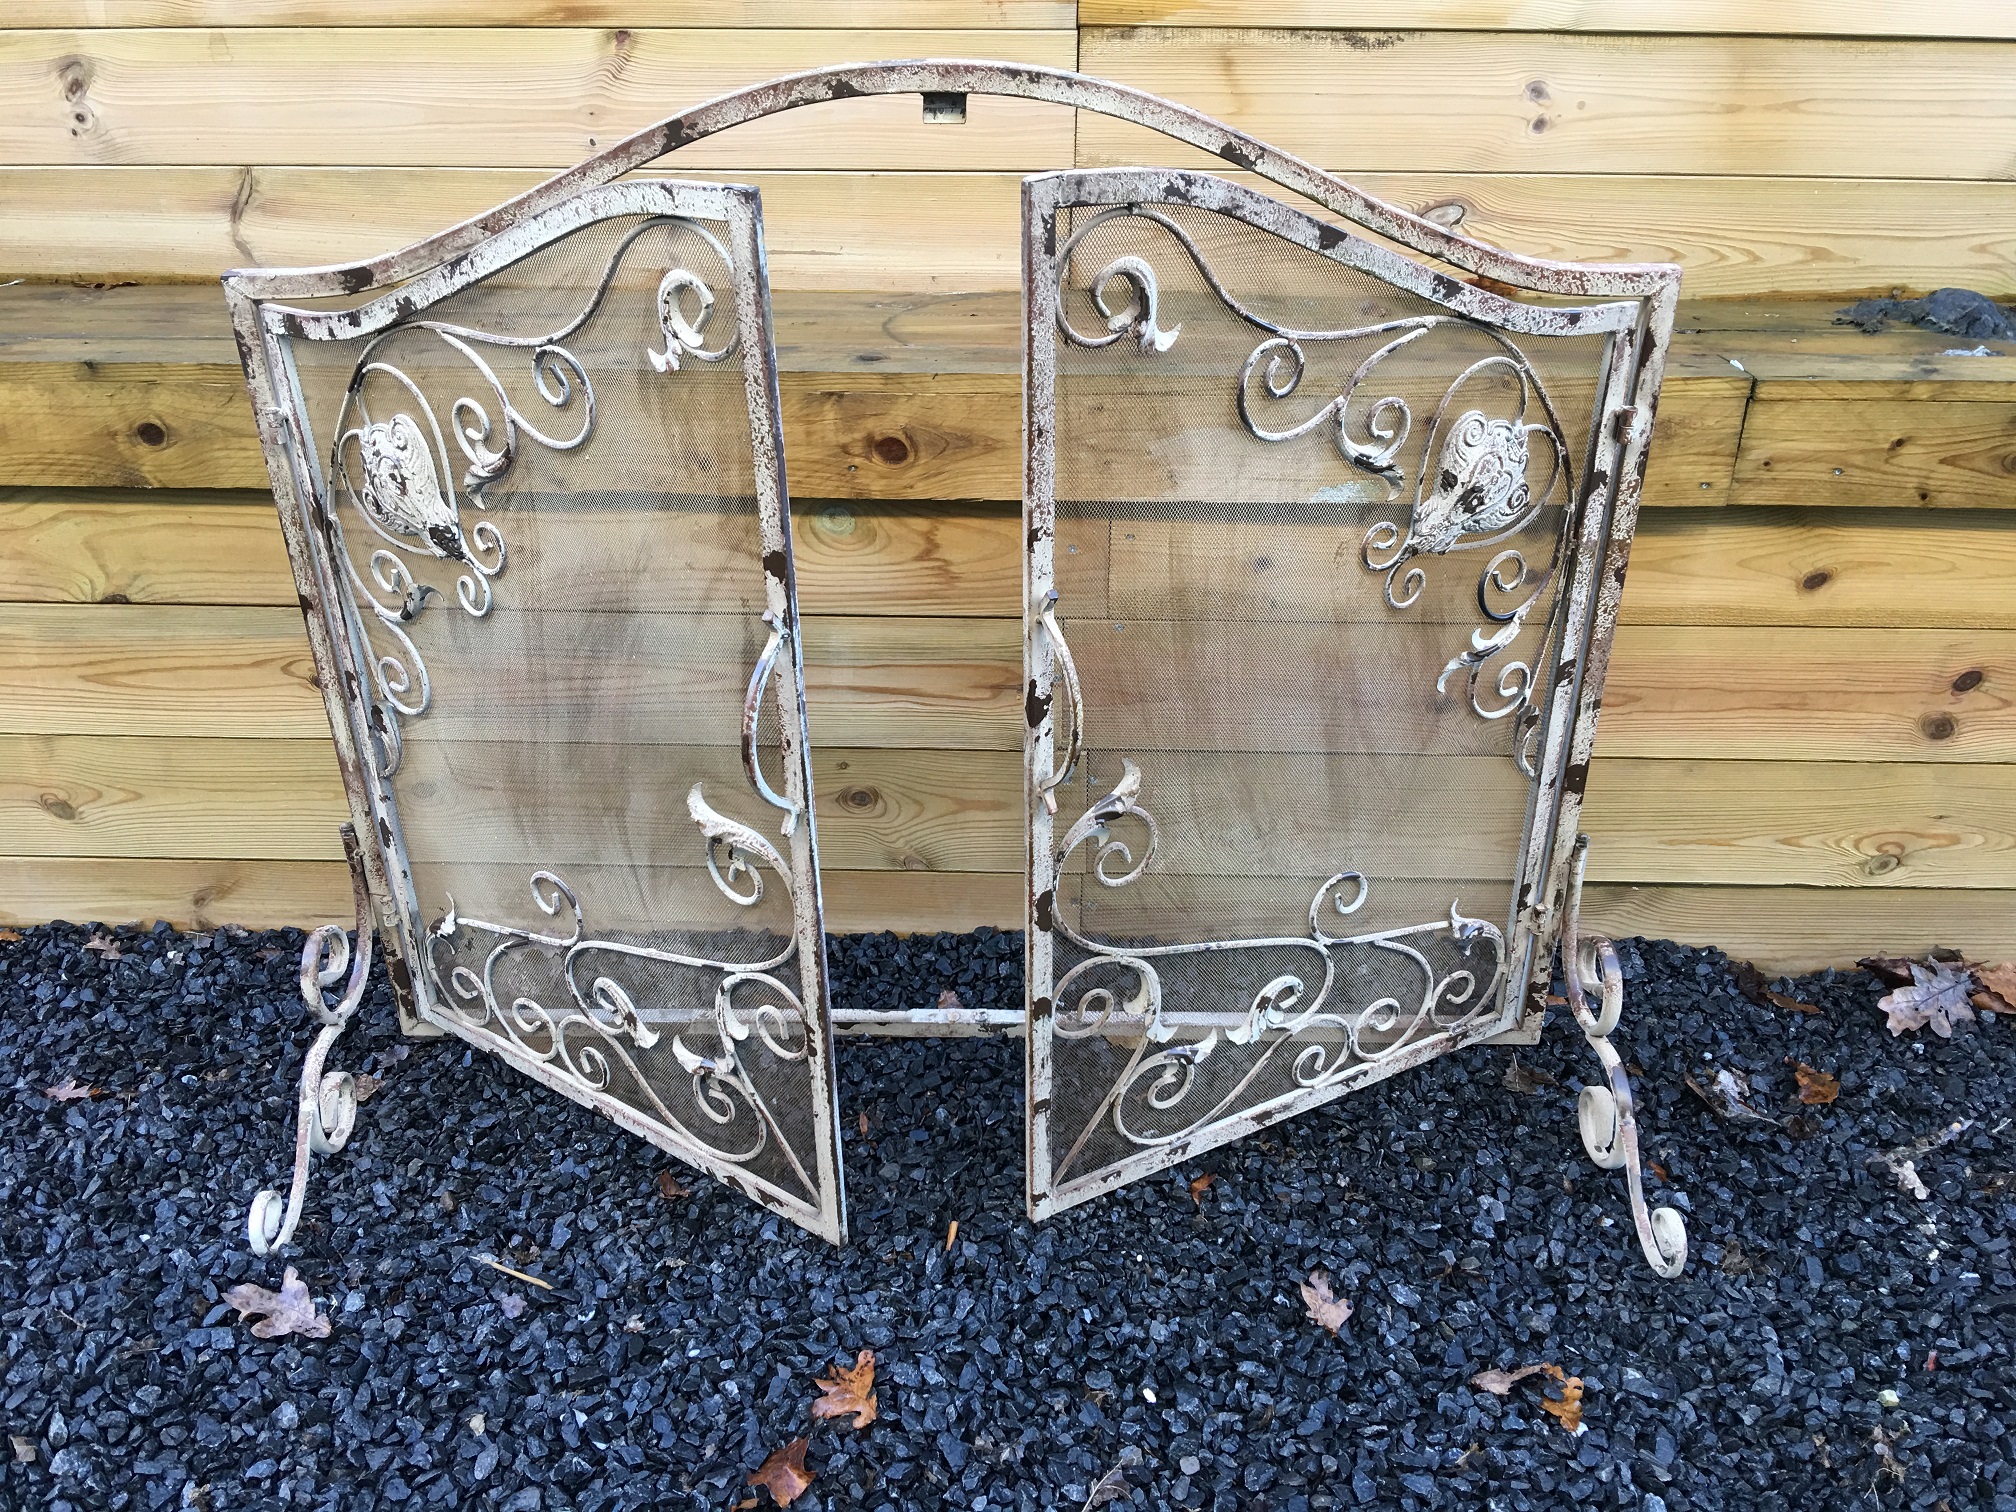 1 Fireplace protection, splash guard, Victorian wrought iron, color white-rest.